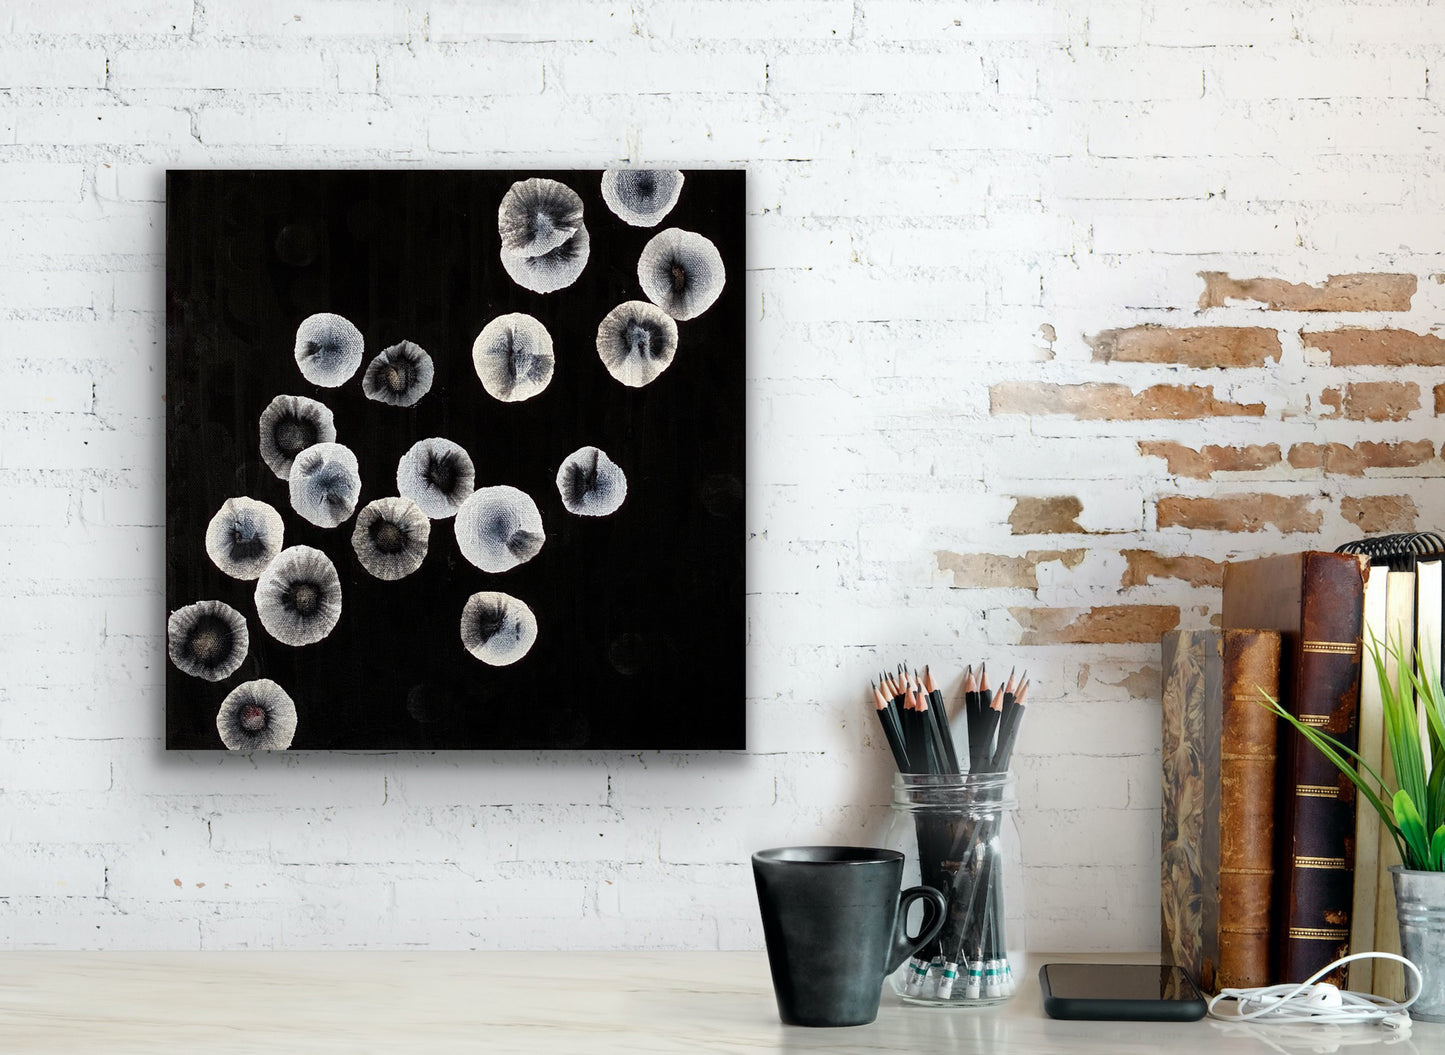 Orbicular Bloom XVII - Abstract Monochrome Painting